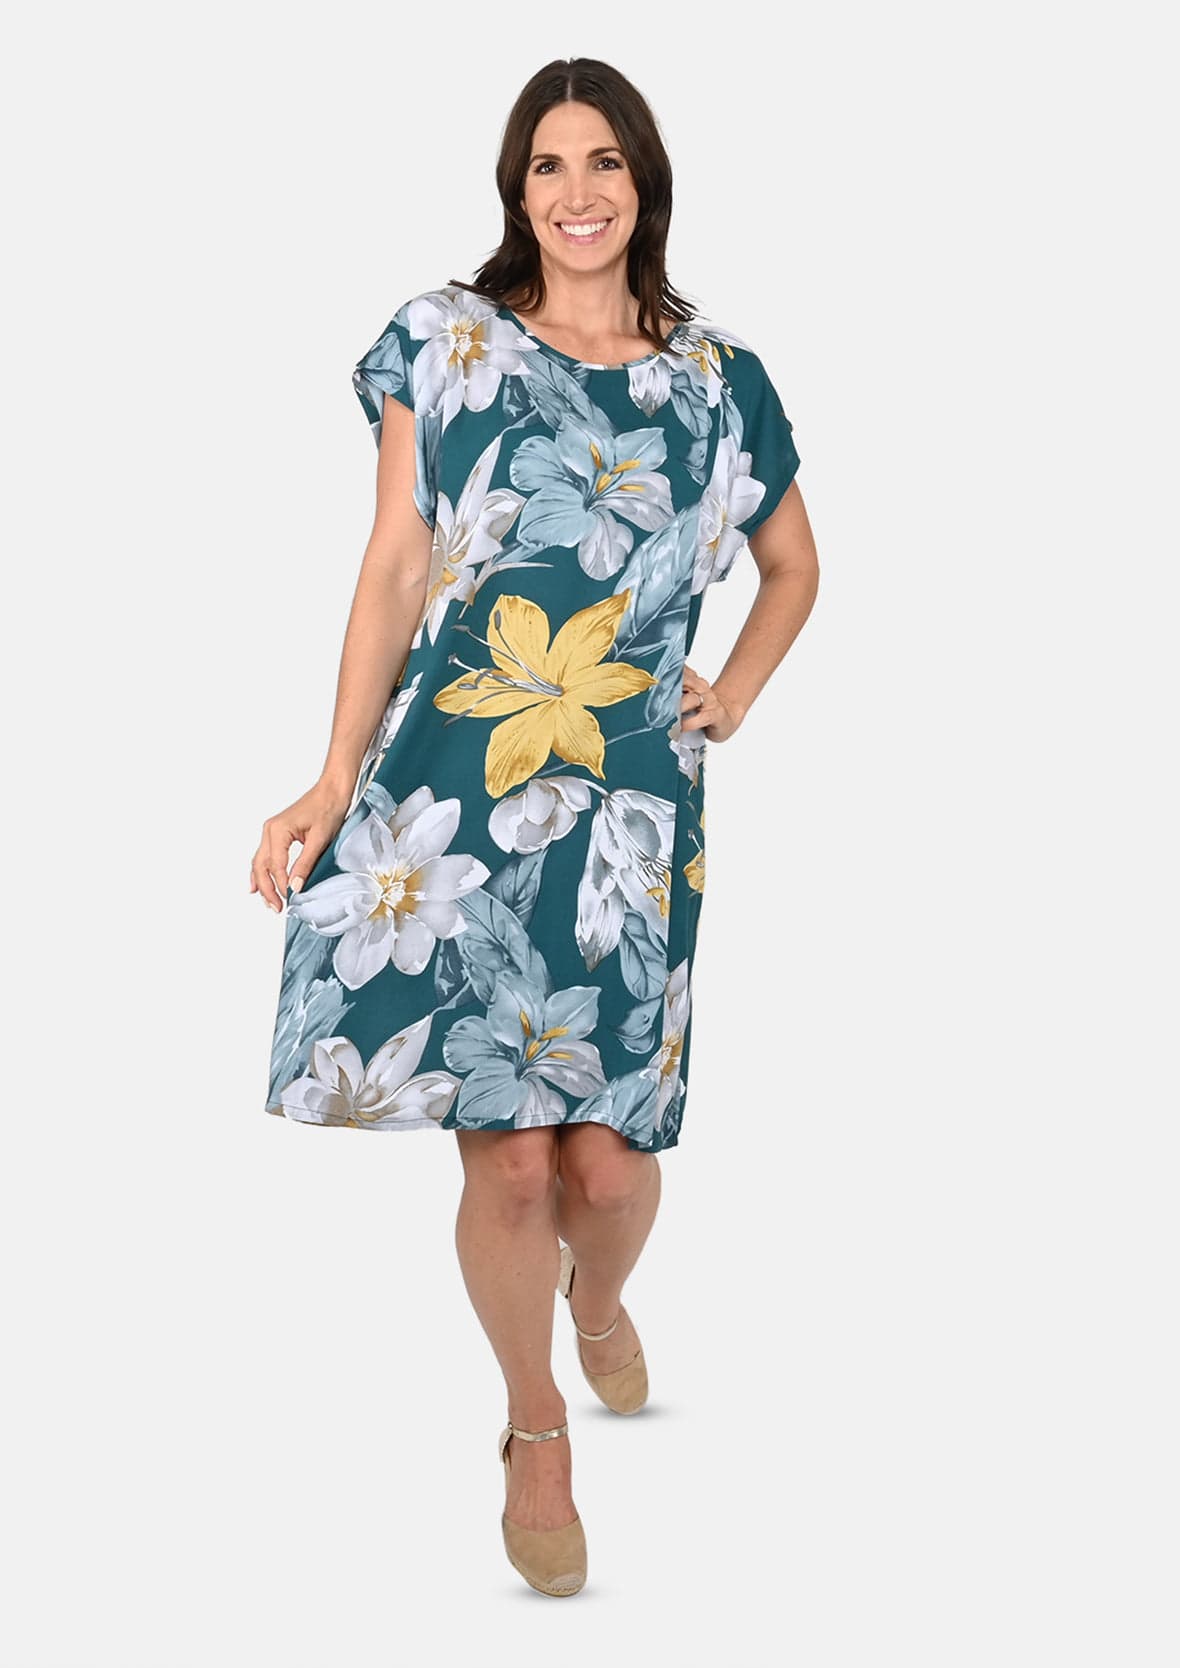 lady wearing floral print tunic teal green dress #color_Teal Green Floral Printed